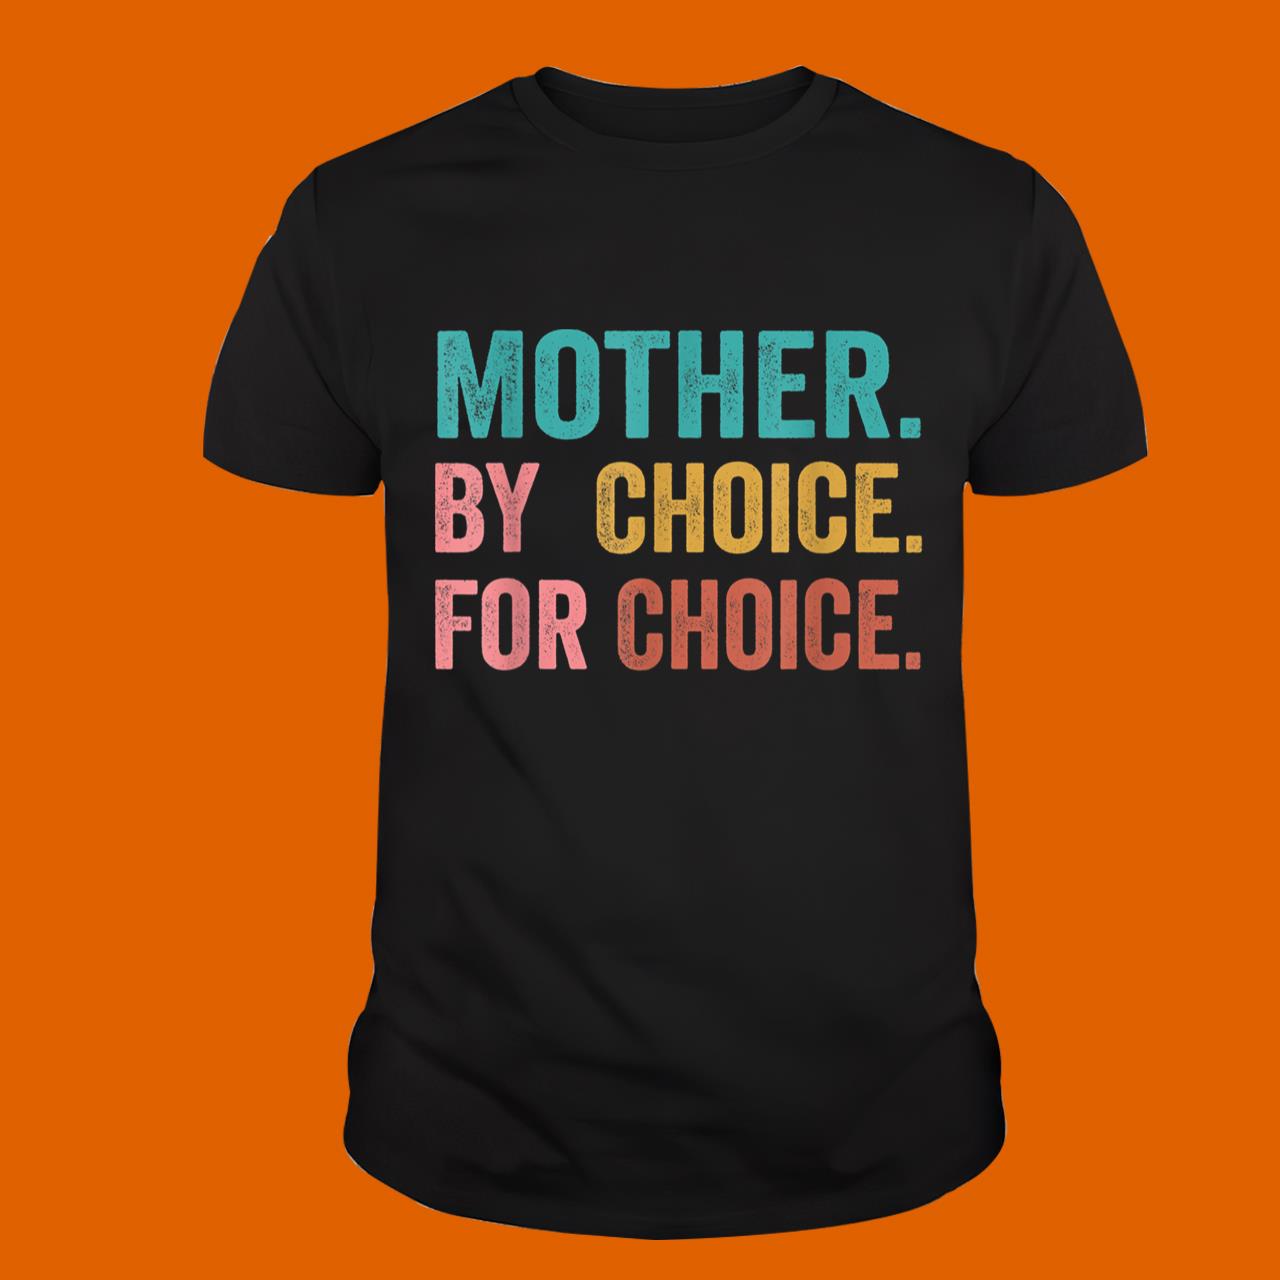 Mother By Choice For Choice Pro Choice Feminist Women Rights T-Shirt